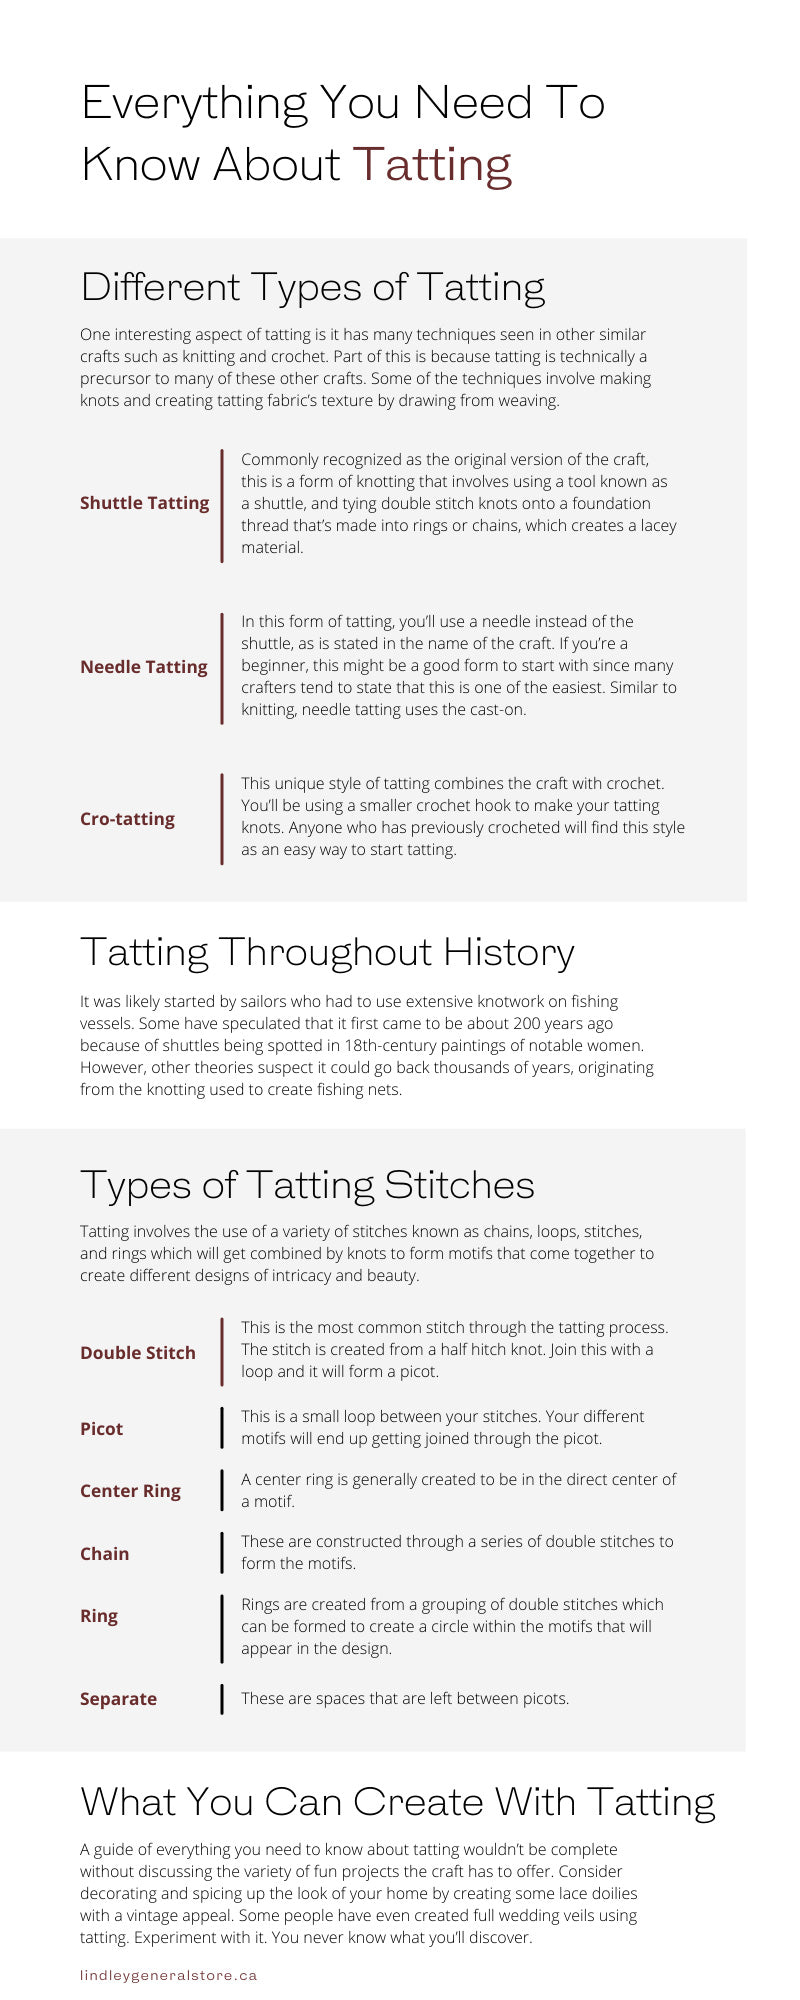 Everything You Need To Know About Tatting